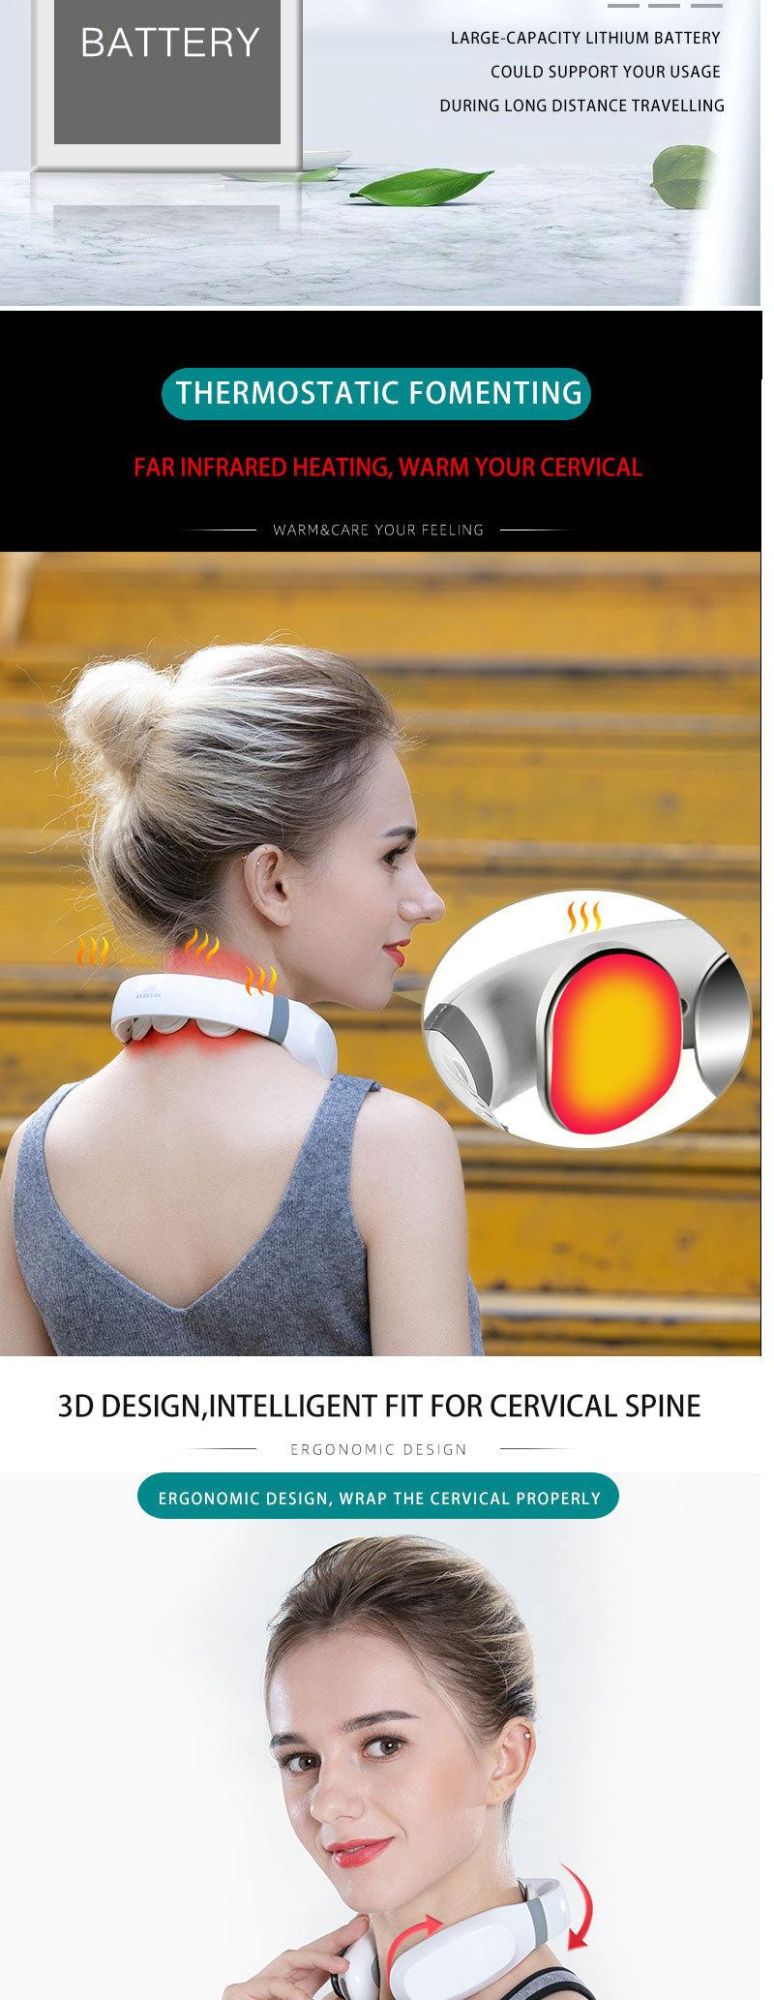 Hezheng Mini Portable Intelligent Electric Pulse Kneading Wireless Neck Massage Product Collar Hot Compress Physical Therapy